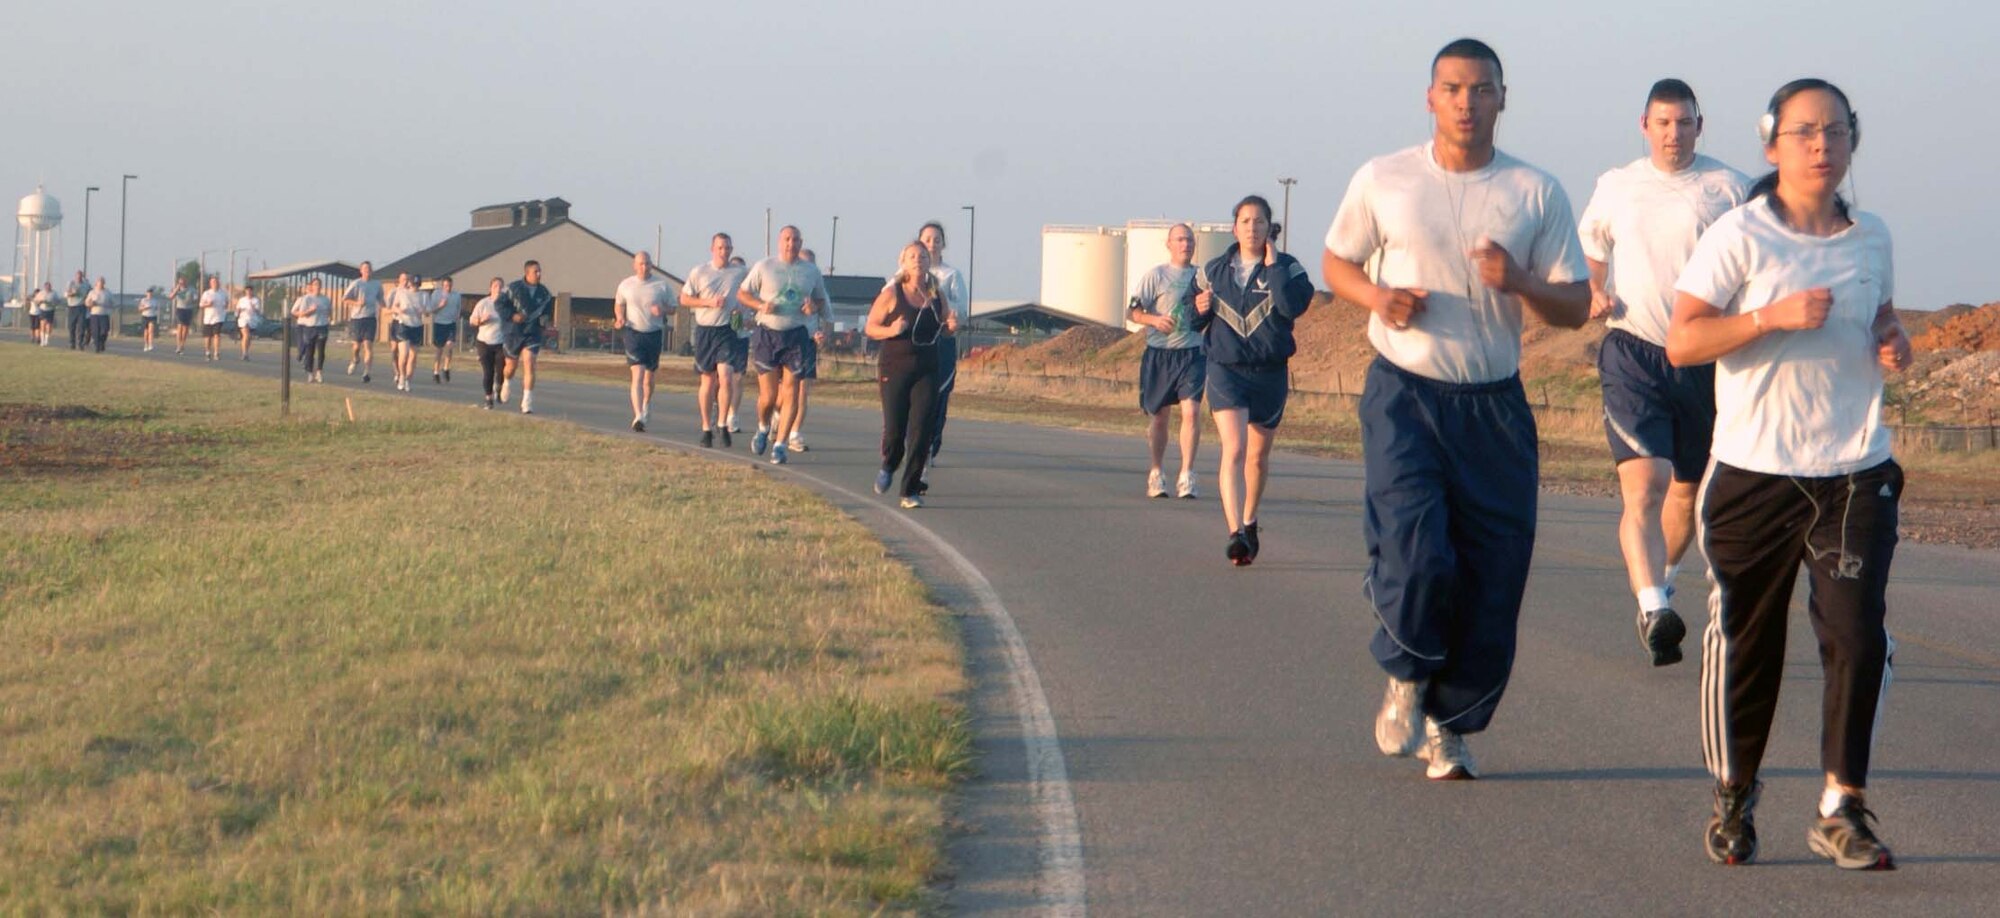 ALTUS AIR FORCE BASE, Okla. – Members of the 97th Air Mobility Wing run in the Earth Day 5K and 10K Fun Run April 22 to celebrate the 41 annual Earth Day. The Air Force joined millions of people around the world with its theme, Conserve Today – Secure Tomorrow, to reflect and build a more sustainable Air Force and world environment.  
(U.S. Air Force photo by Kenneth Scarle/97th Air Mobility Wing Public Affairs) 